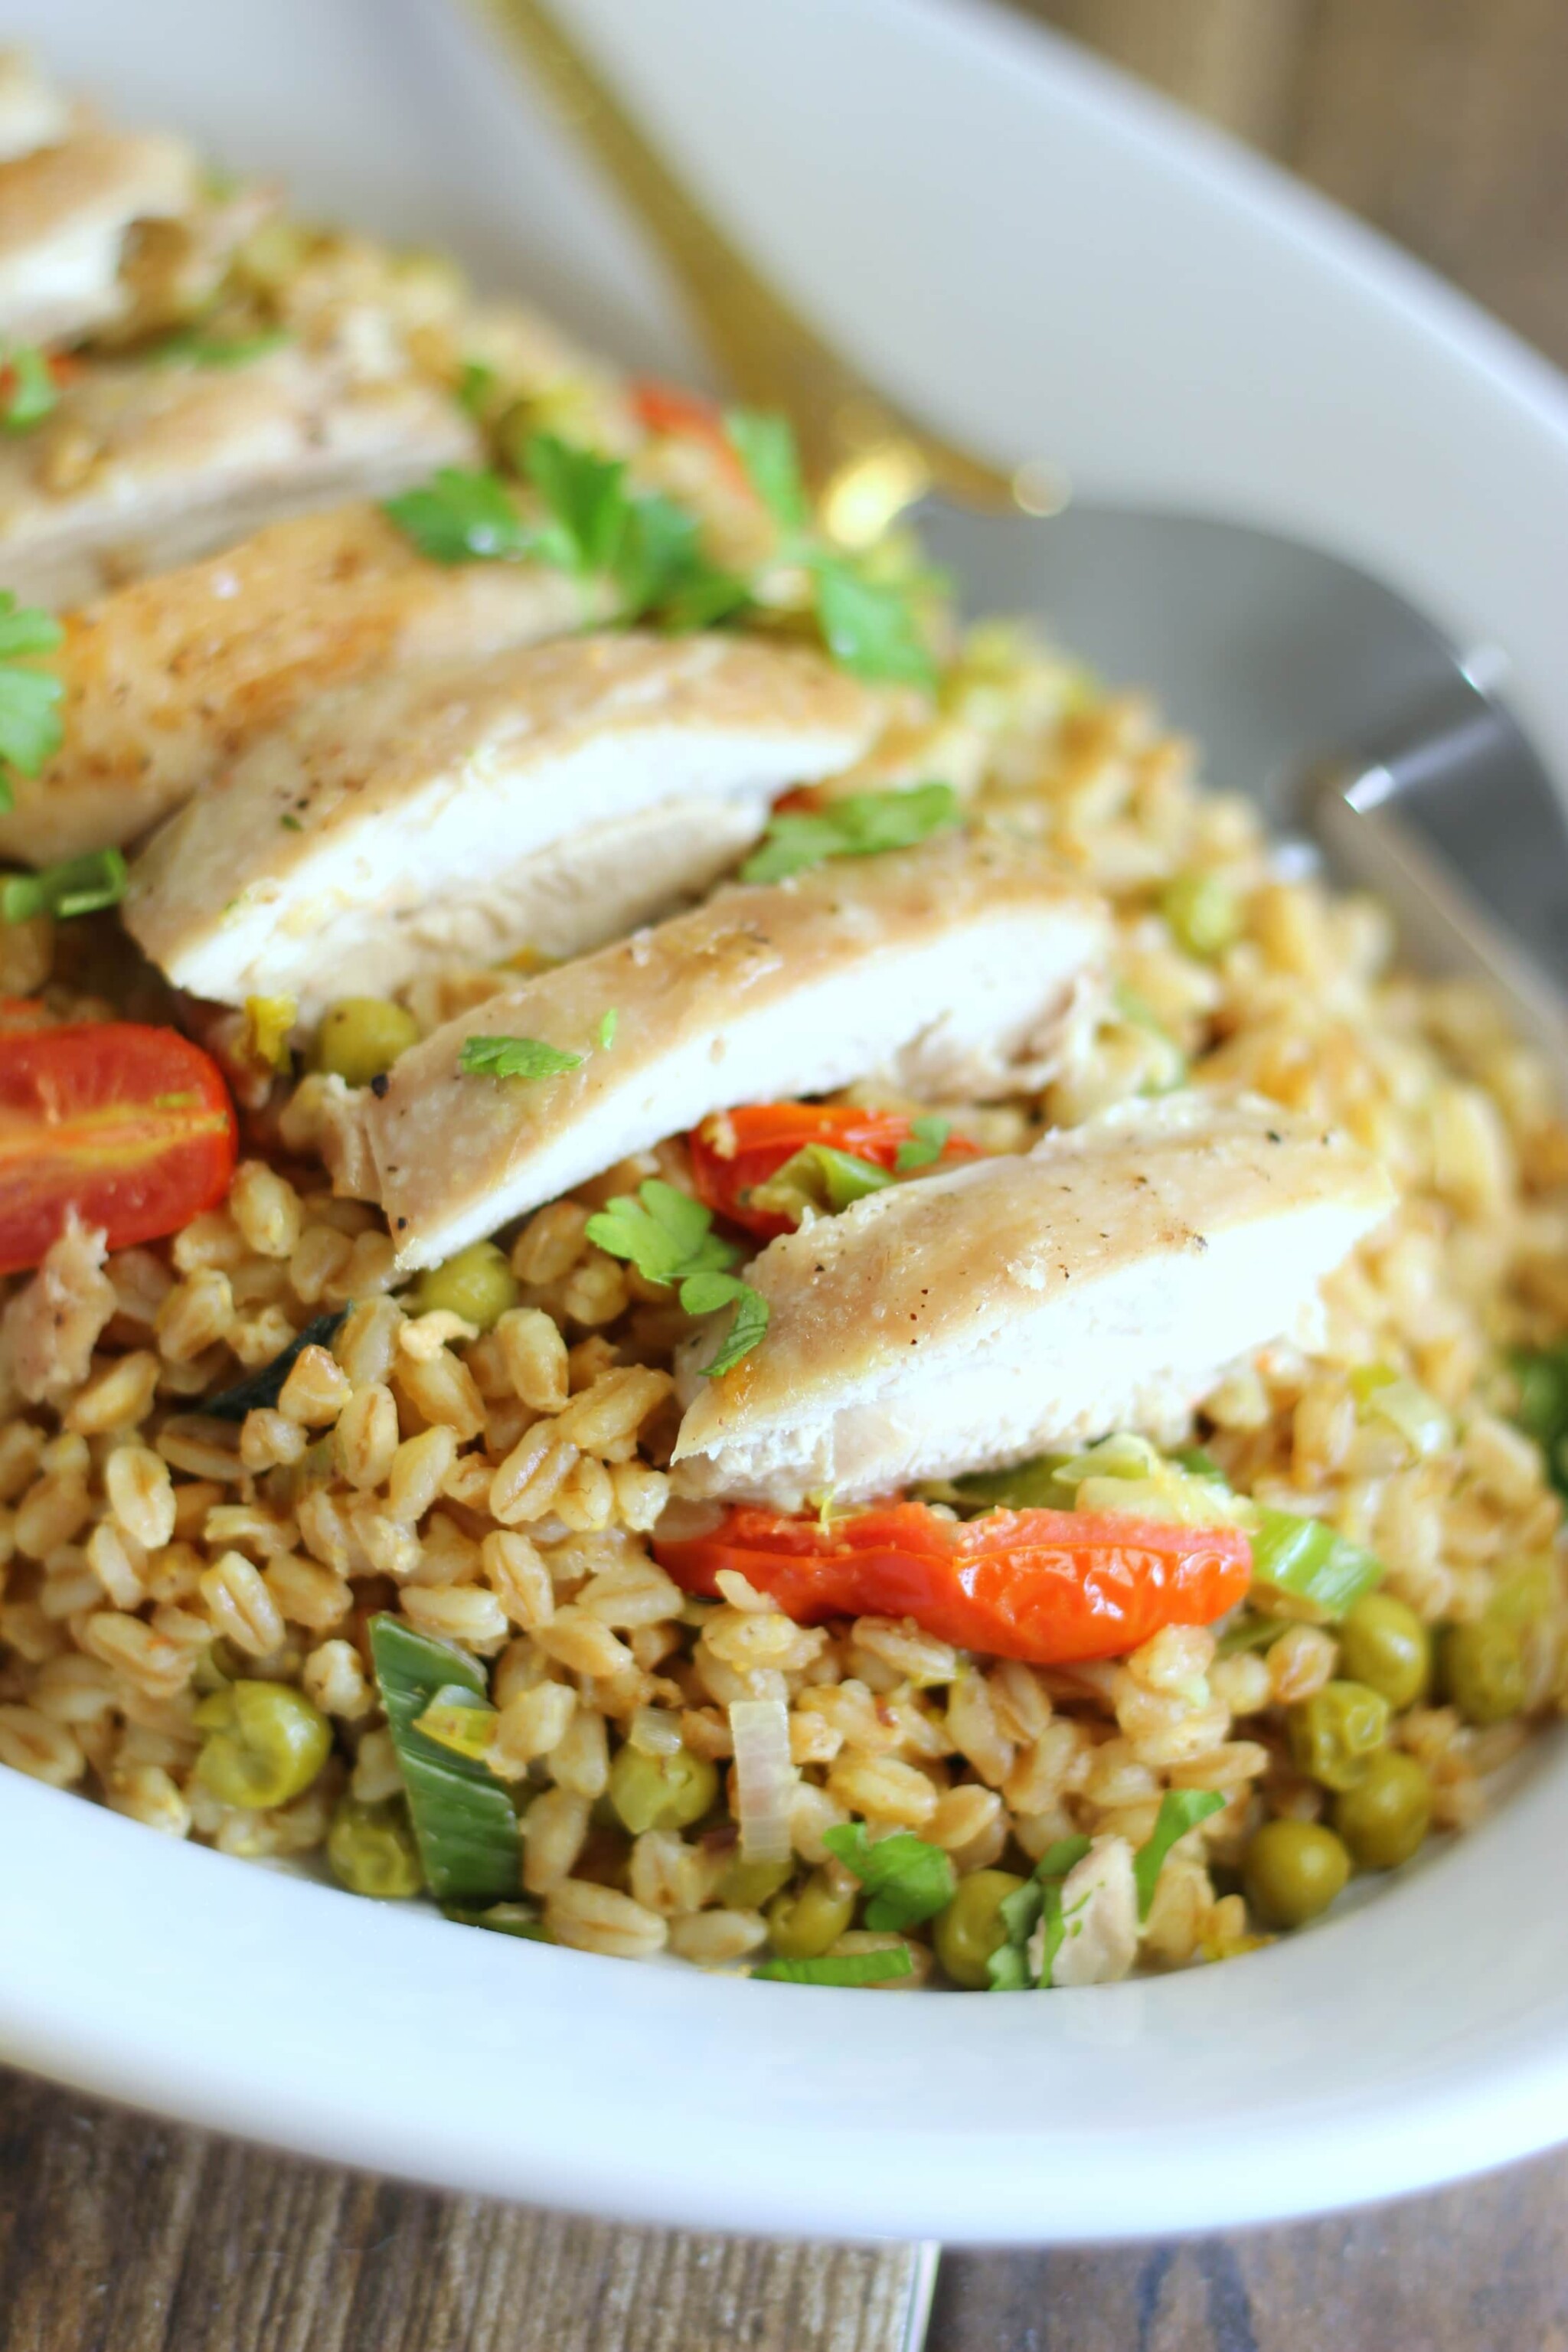 This roasted chicken with farro and fresh spring veggies is a delightful and complete dinner recipe that you can easily prepare for a week night meal.